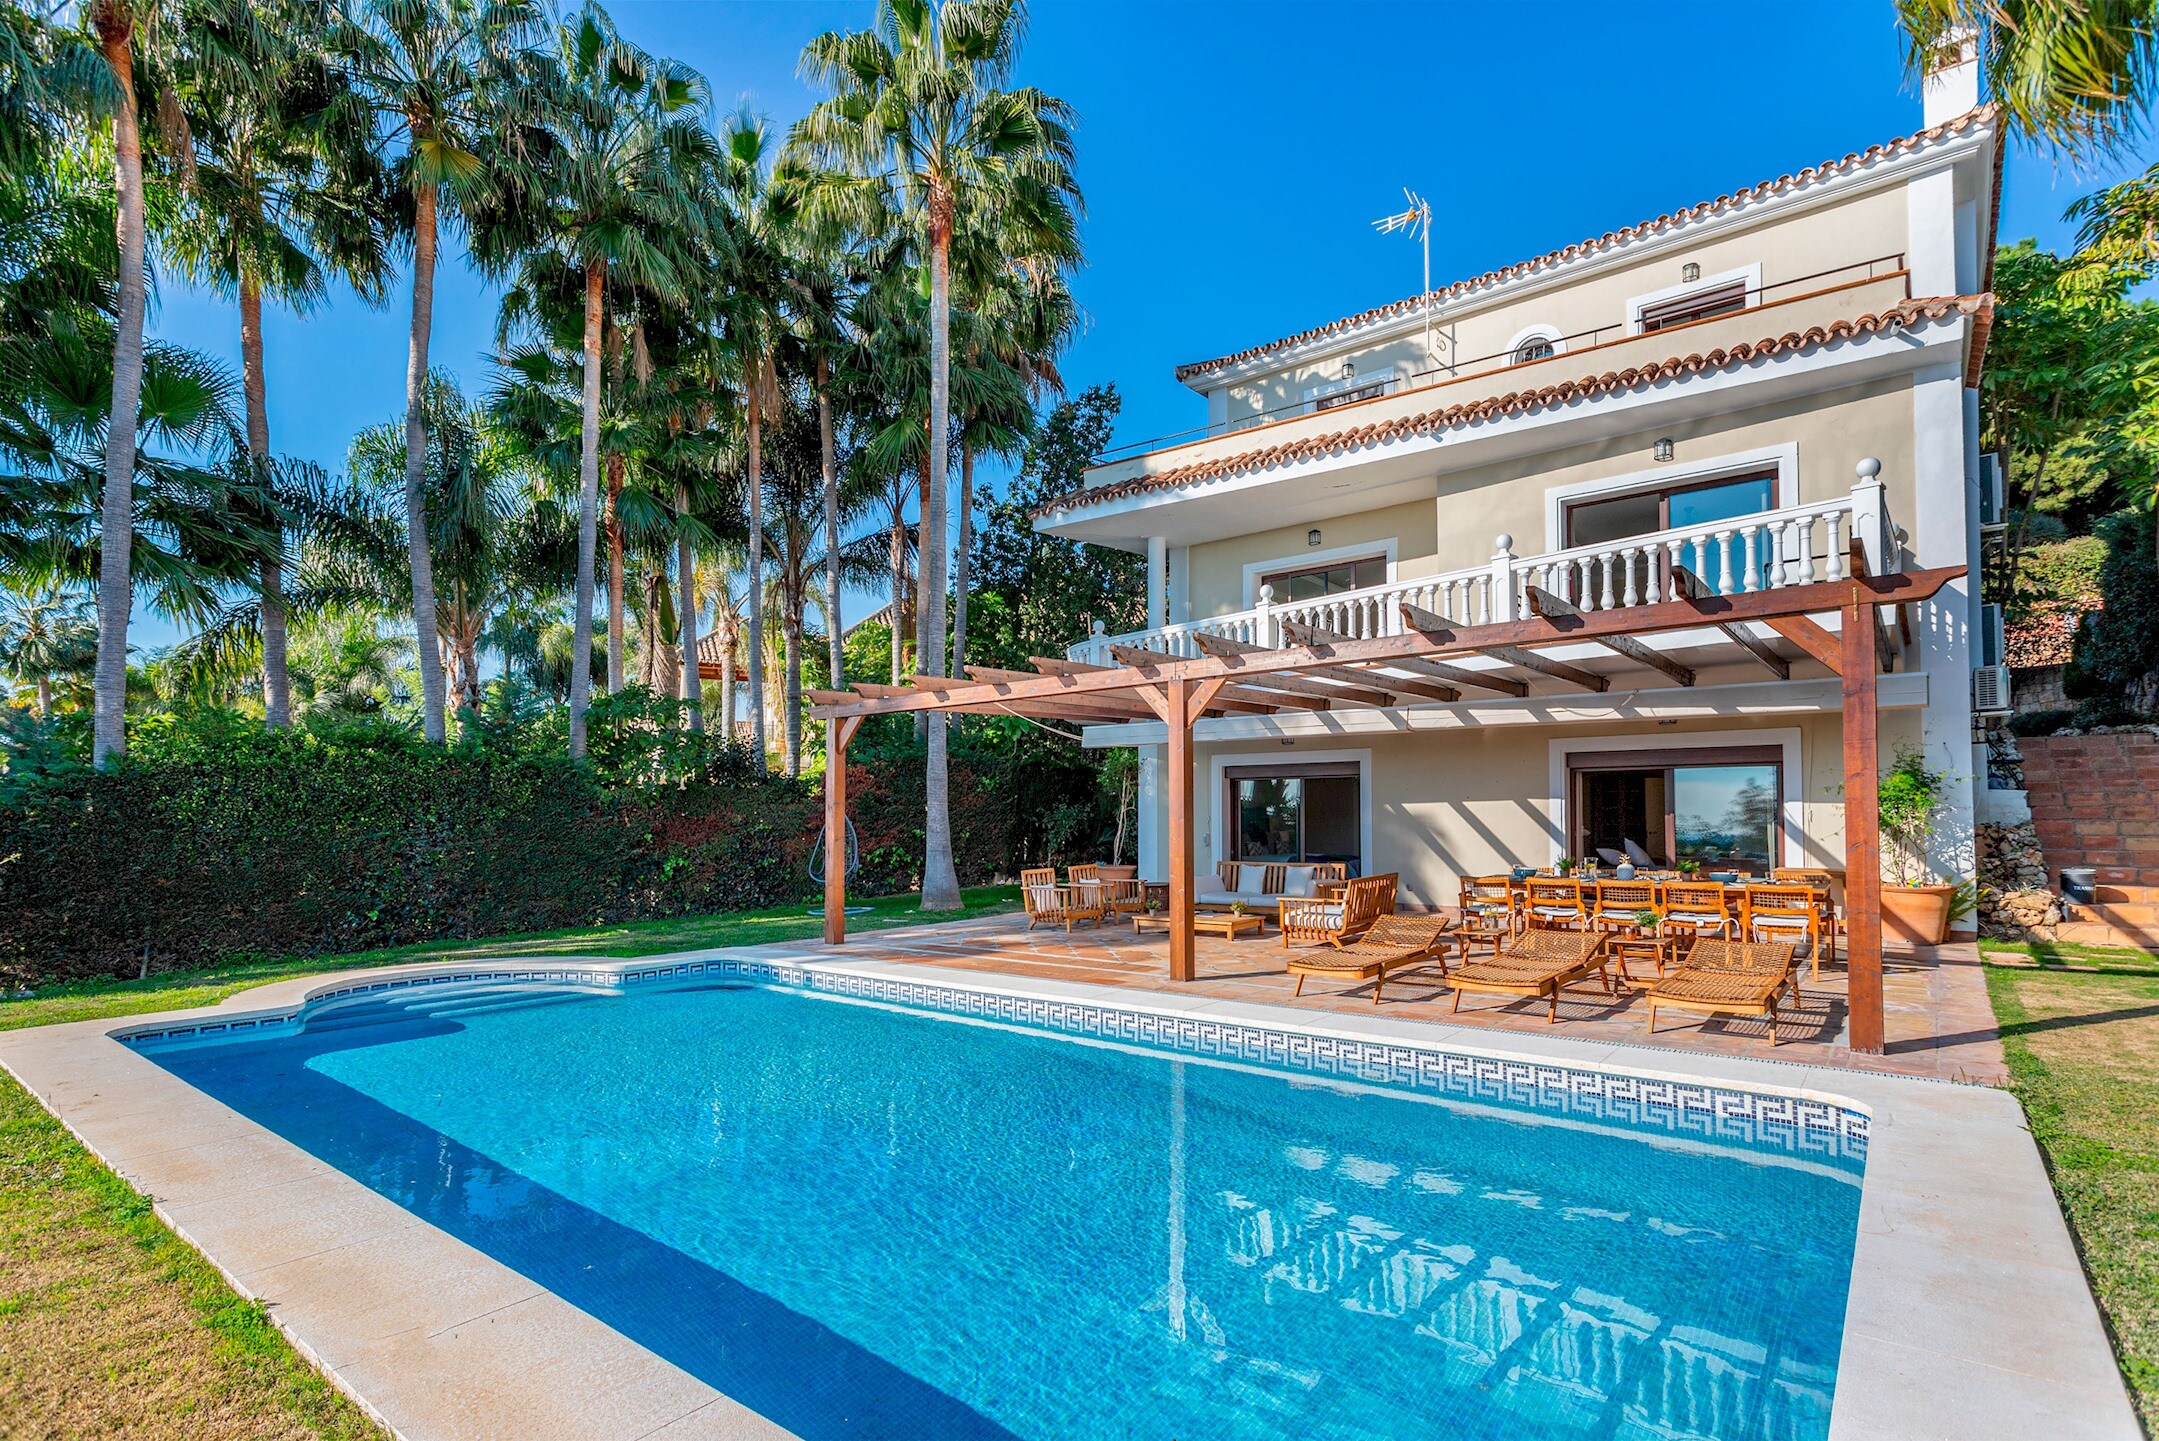 Property Image 2 - Amazing house with pool in Marbella. Rio Real Golf